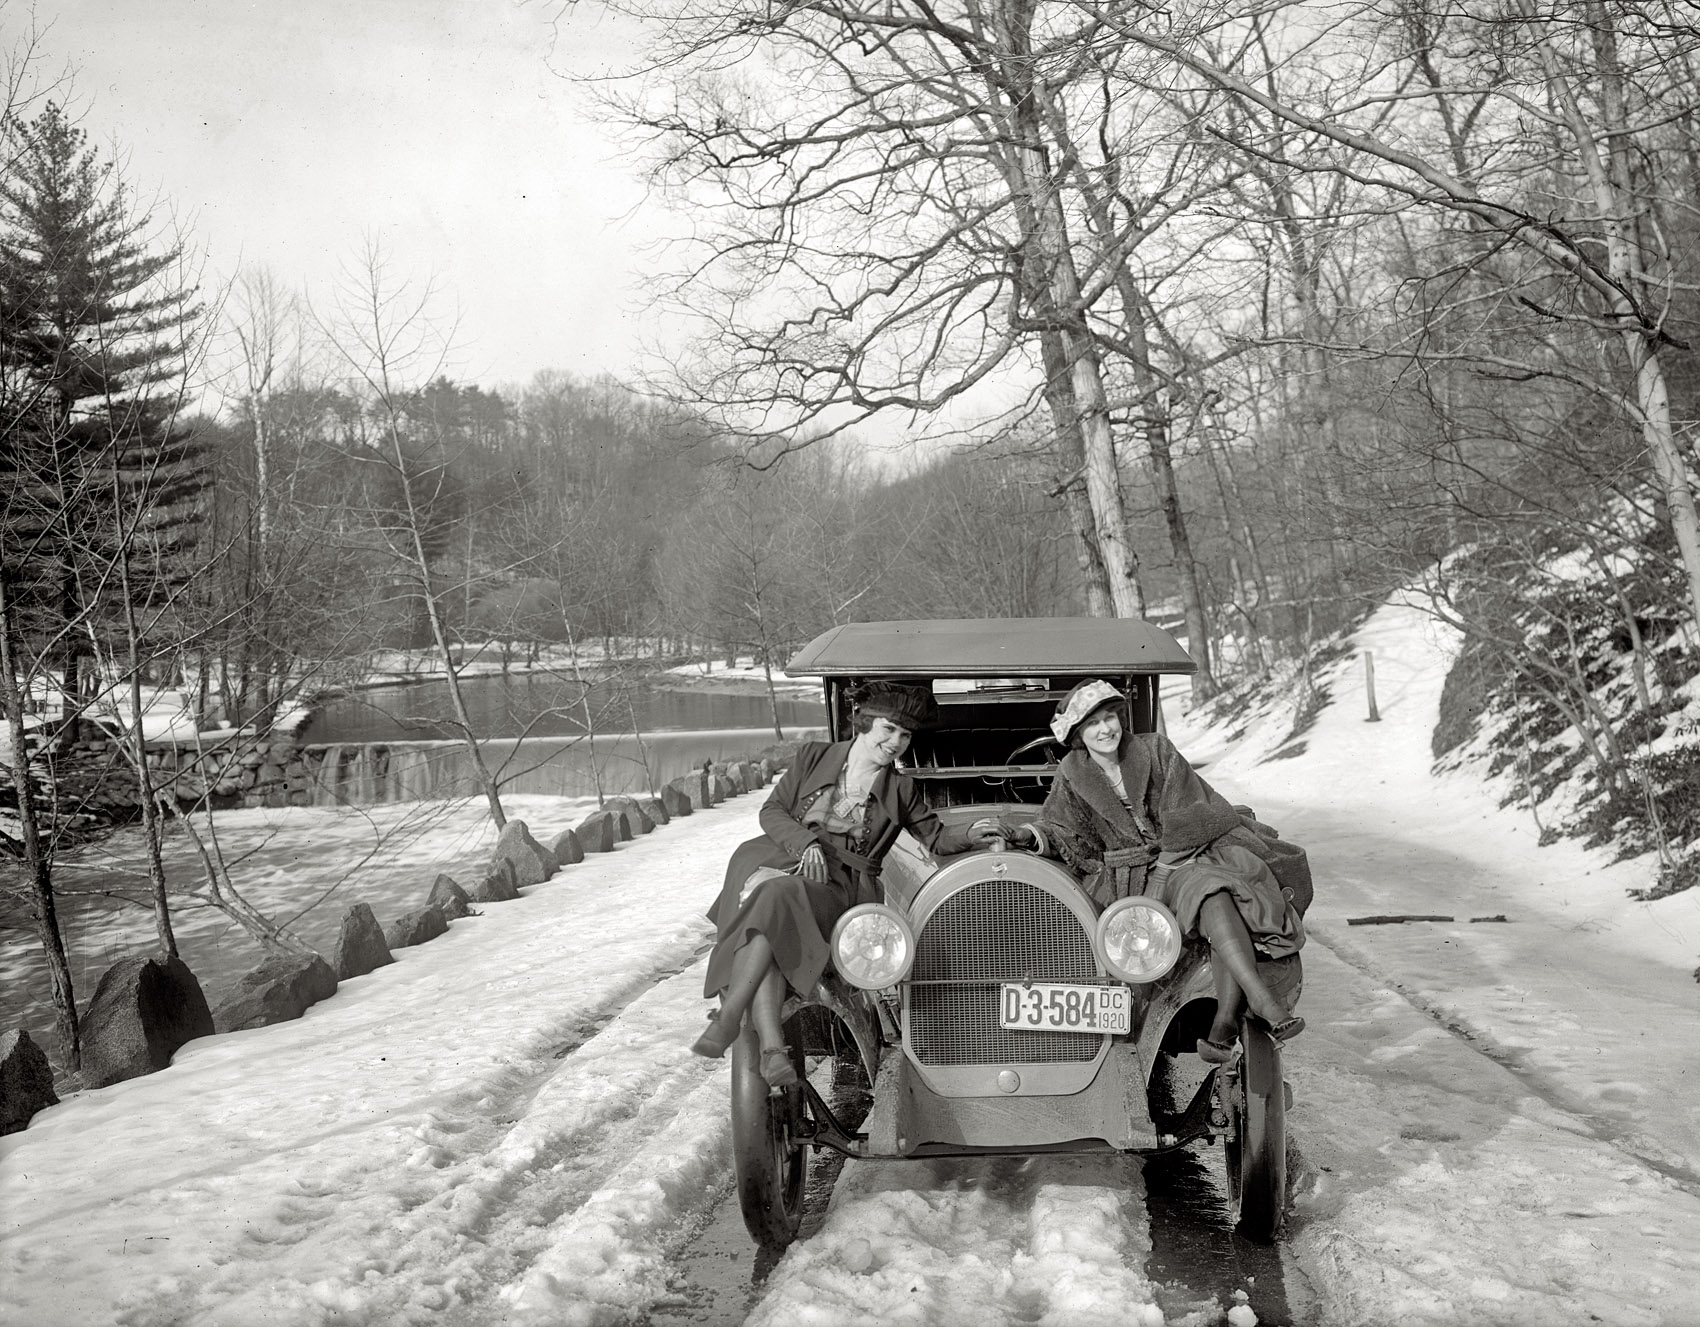 Over the river and through the woods in 1920. "Oldsmobile Sales Co., Rock Creek Park." National Photo Company Collection glass negative. View full size.